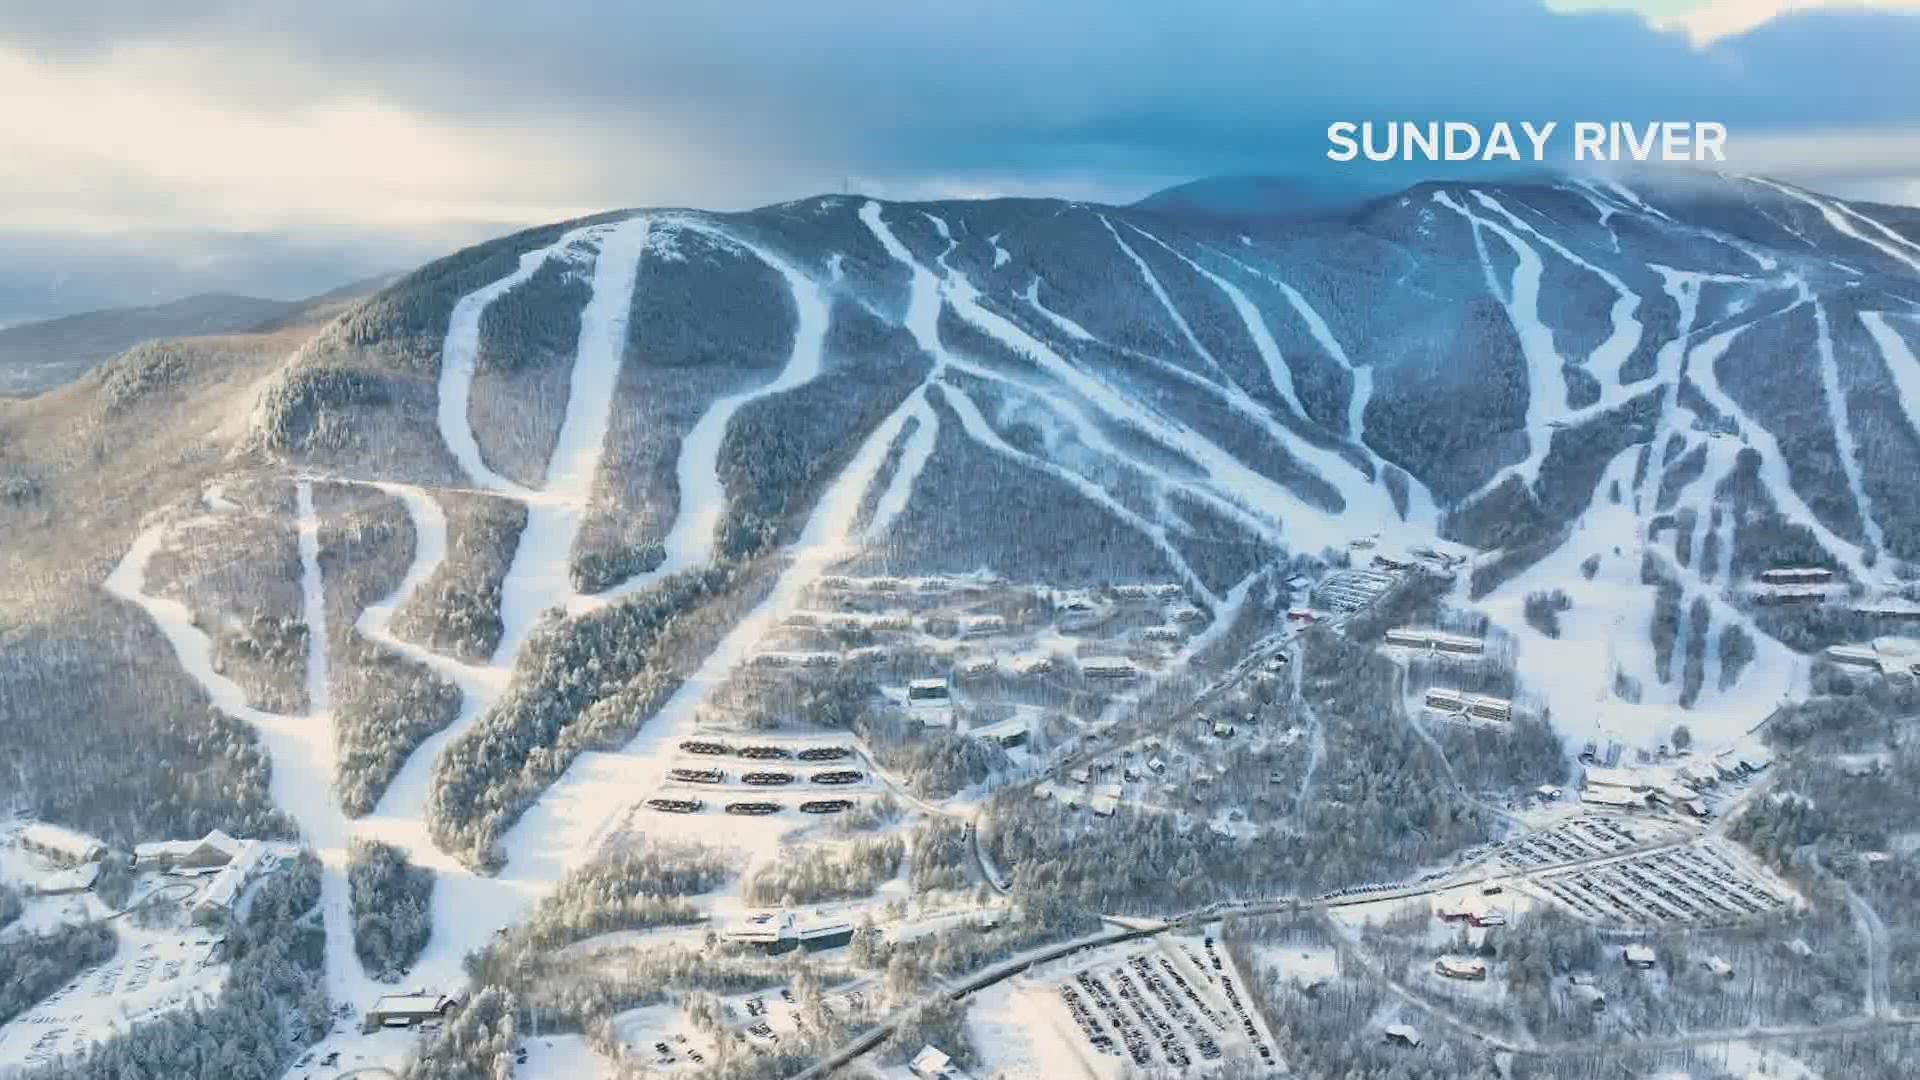 Ski areas like Saddleback, Sunday River and Sugarloaf all saw several inches of snow ahead of Christmas vacation week